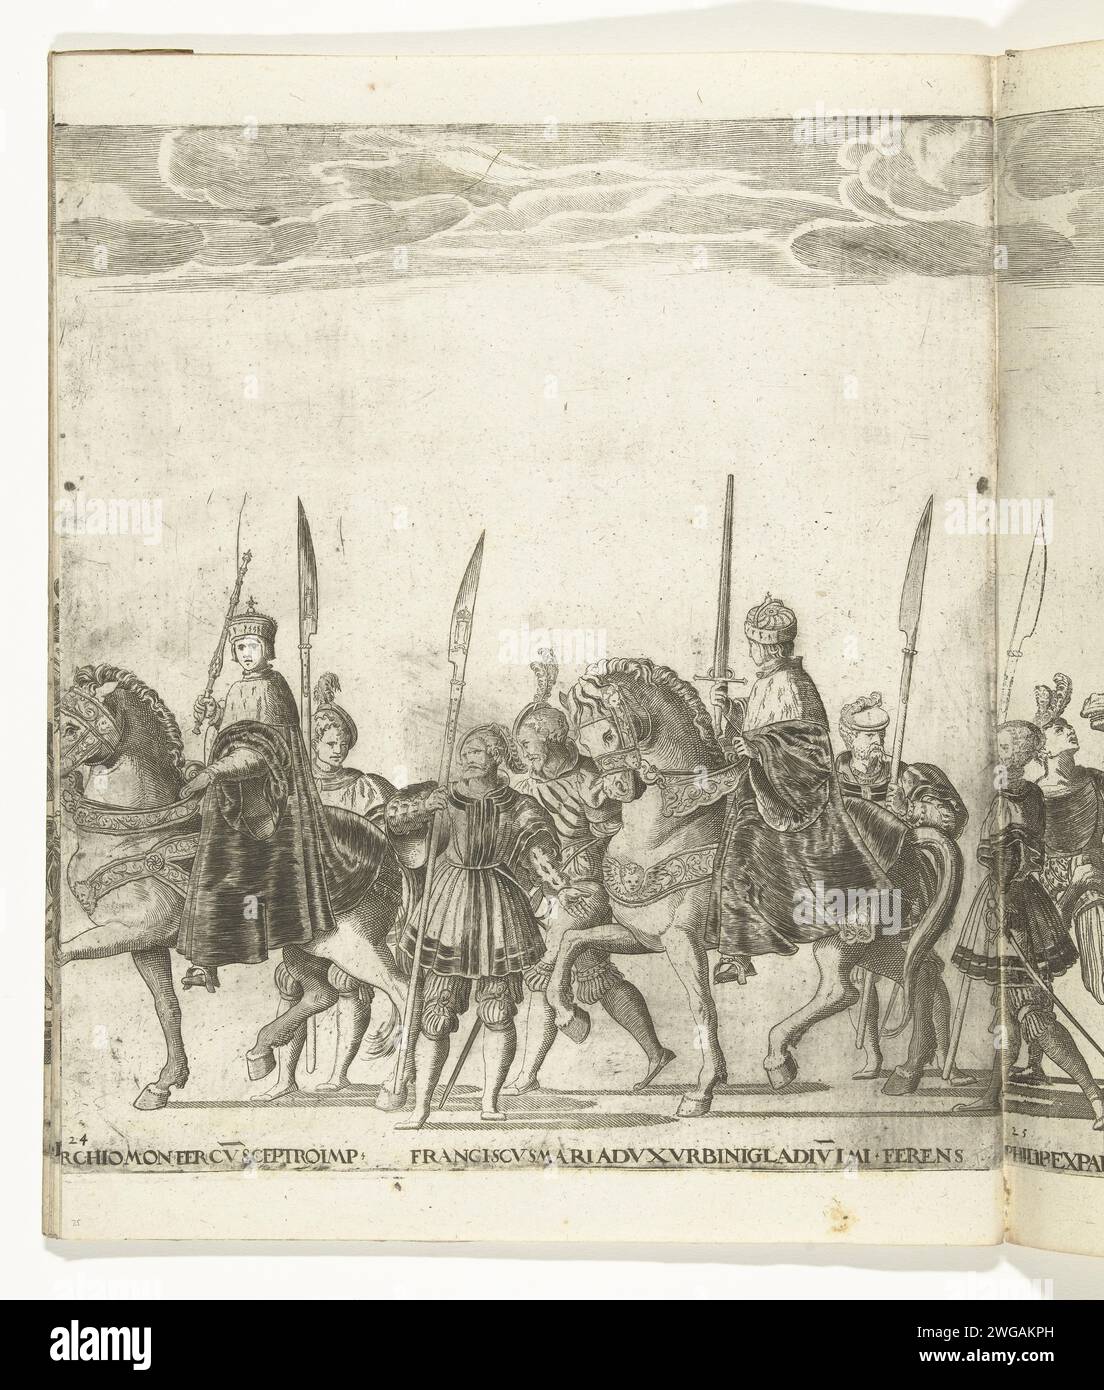 Boniface IV Paleologo, Markgraaf van Monferrato, with the imperial scepter and Francesco Maria della Rovere, Duke of Urbino, with the imperial sword, plate 24, 1620 - 1699 print Bonifatius IV Paleologo, Markgraaf of Monferrato, with the imperial scepter and Francesco Maria della Rovere, Duke of Urbino, with the imperial sword, plate 24. Procession of Charles V with the Pope Clemens VII in Bologna after his coroner, 24 February 1530 . Mechelen paper etching / engraving festivities (+ parade, pageant, cavalcade  festive activities) Bologna Stock Photo